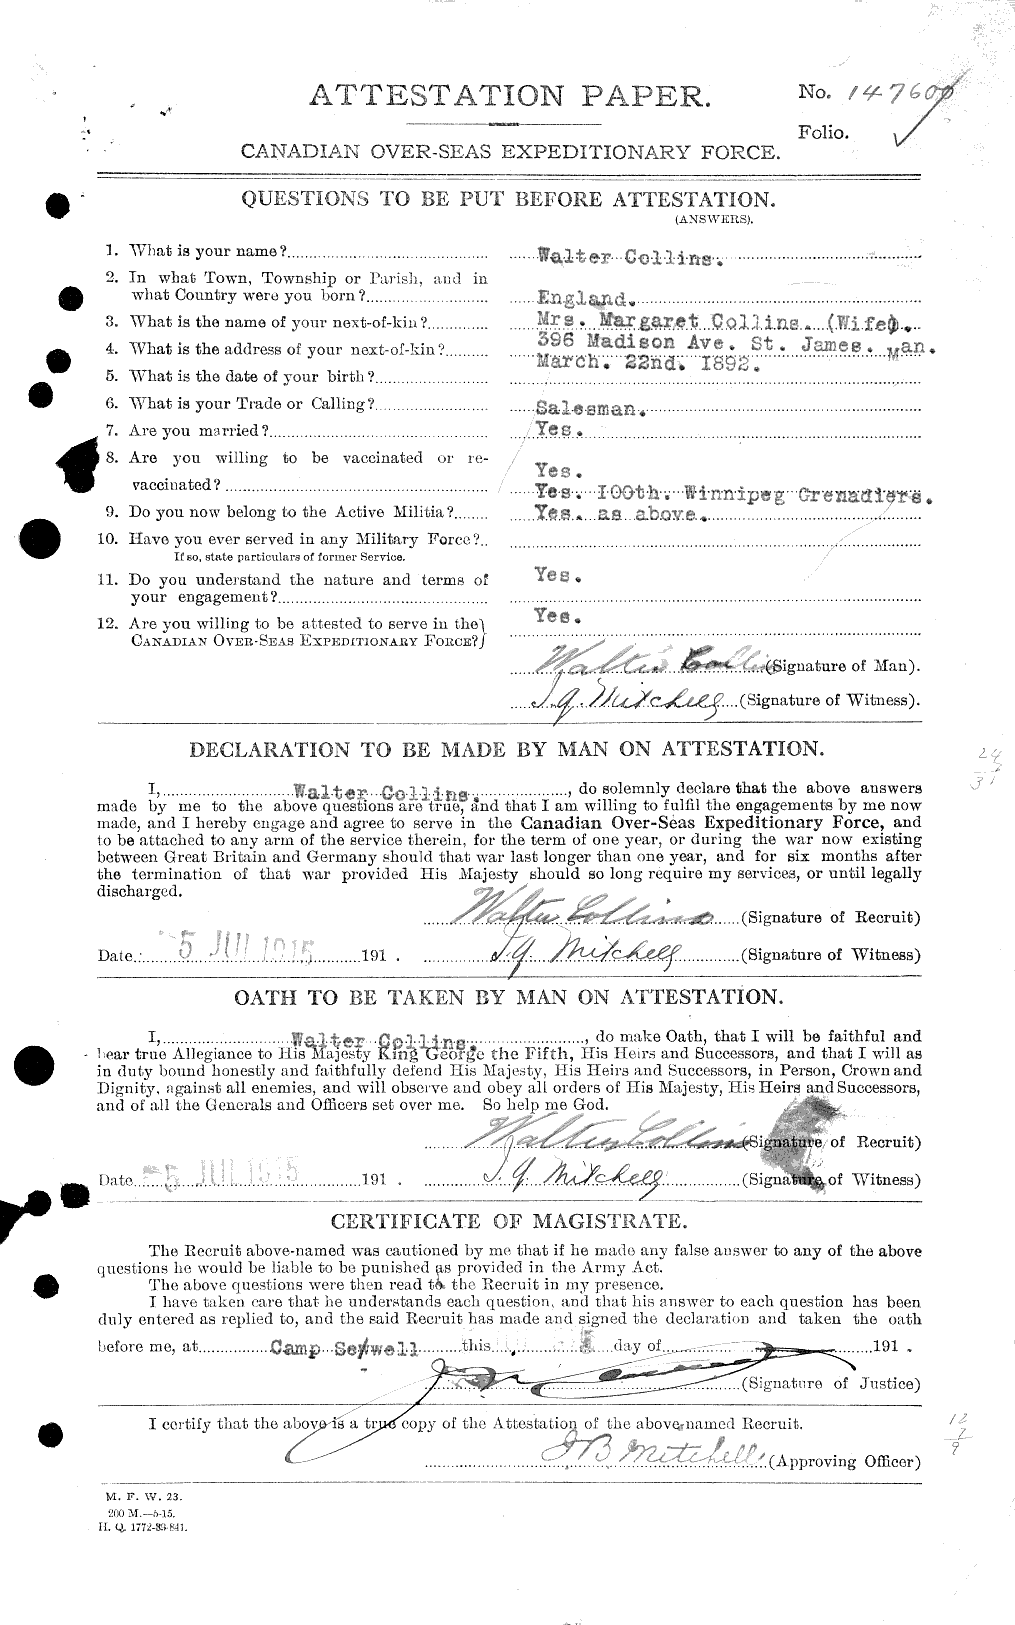 Personnel Records of the First World War - CEF 040688a